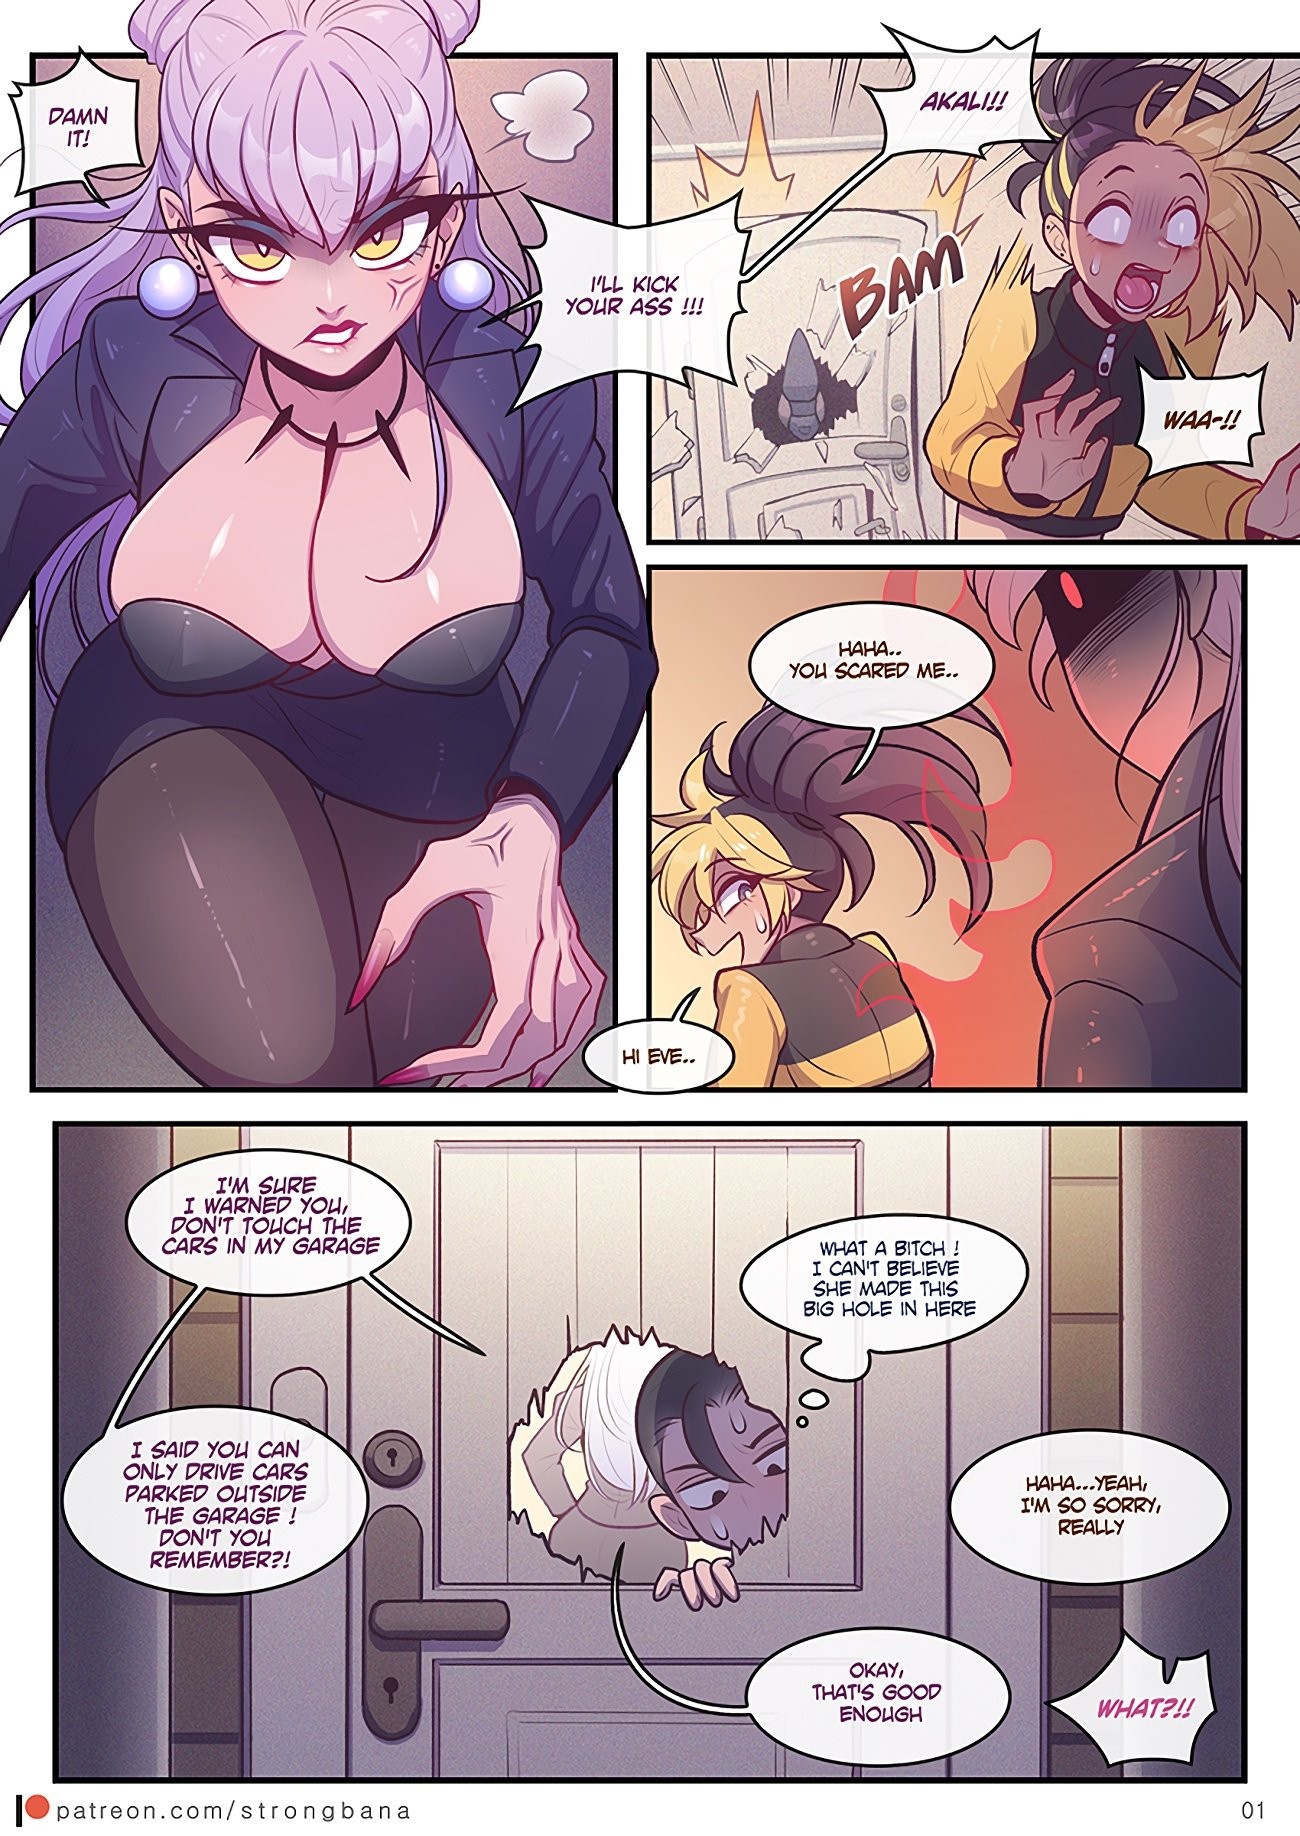 Strong Bana - Live Streaming (League of Legends) porn comic picture 3